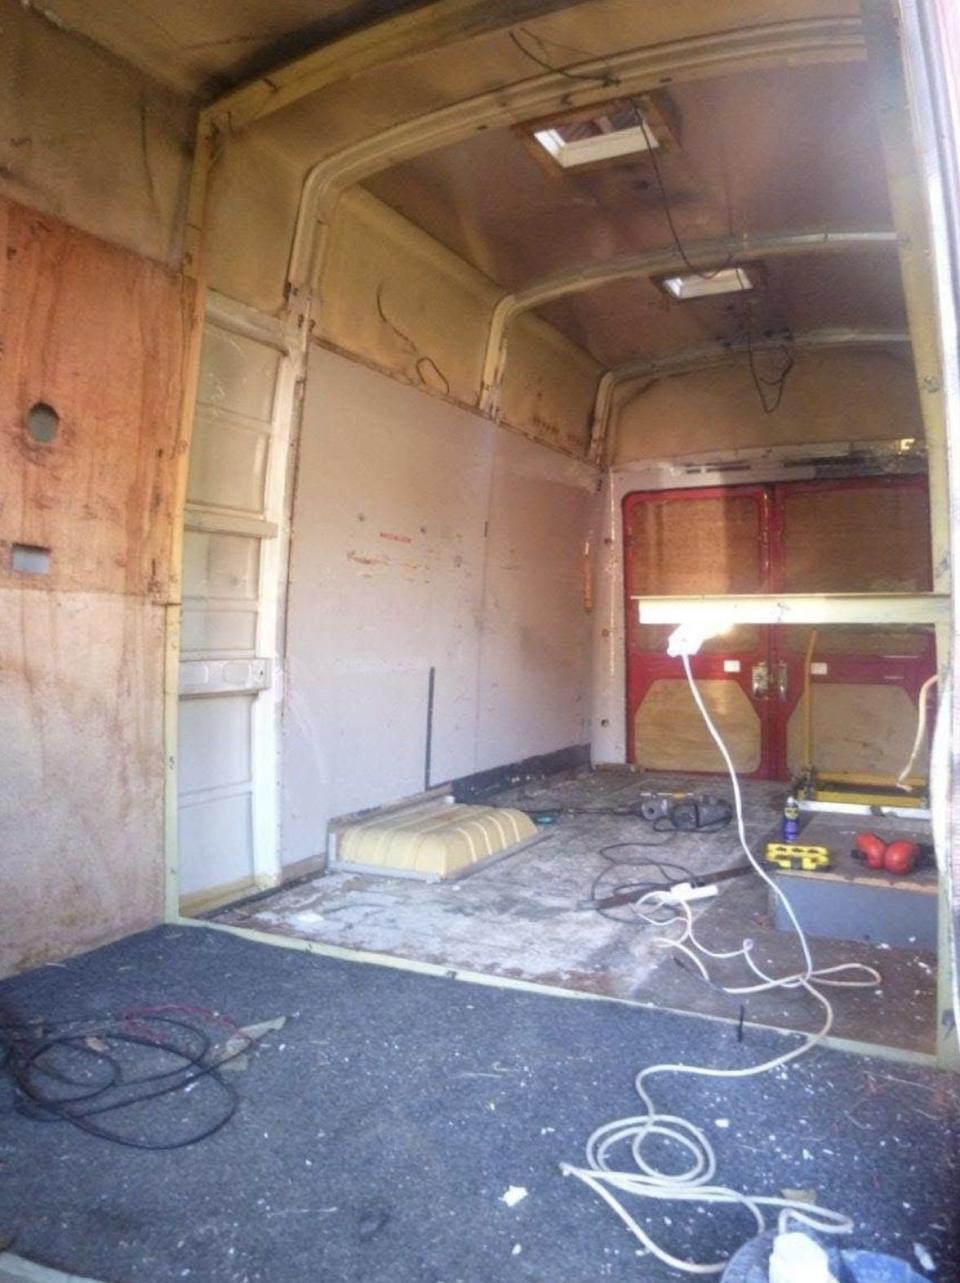 Another view of Jess Branton and Dave Smith's emptied firetruck before they converted it.